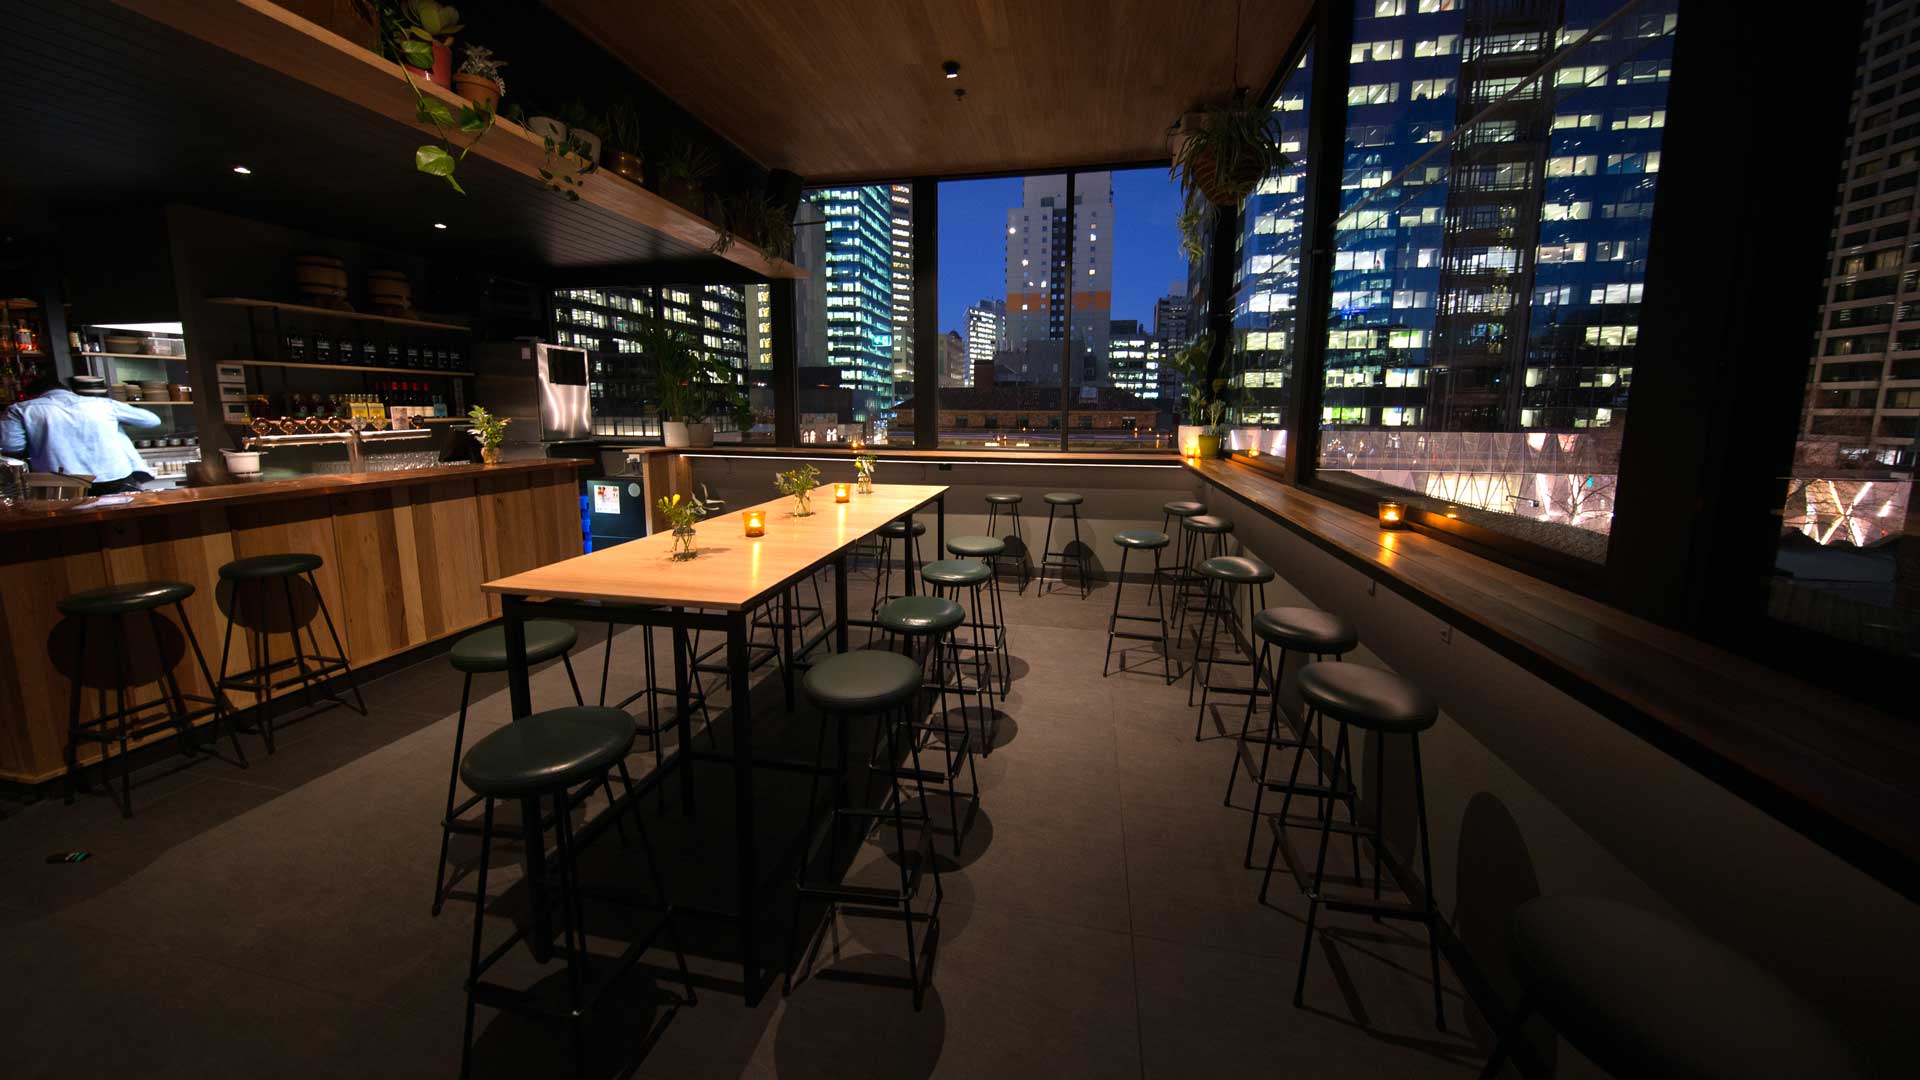 Bomba's Spanish-Inspired Rooftop Bar Has Reopened After an Impressive Makeover